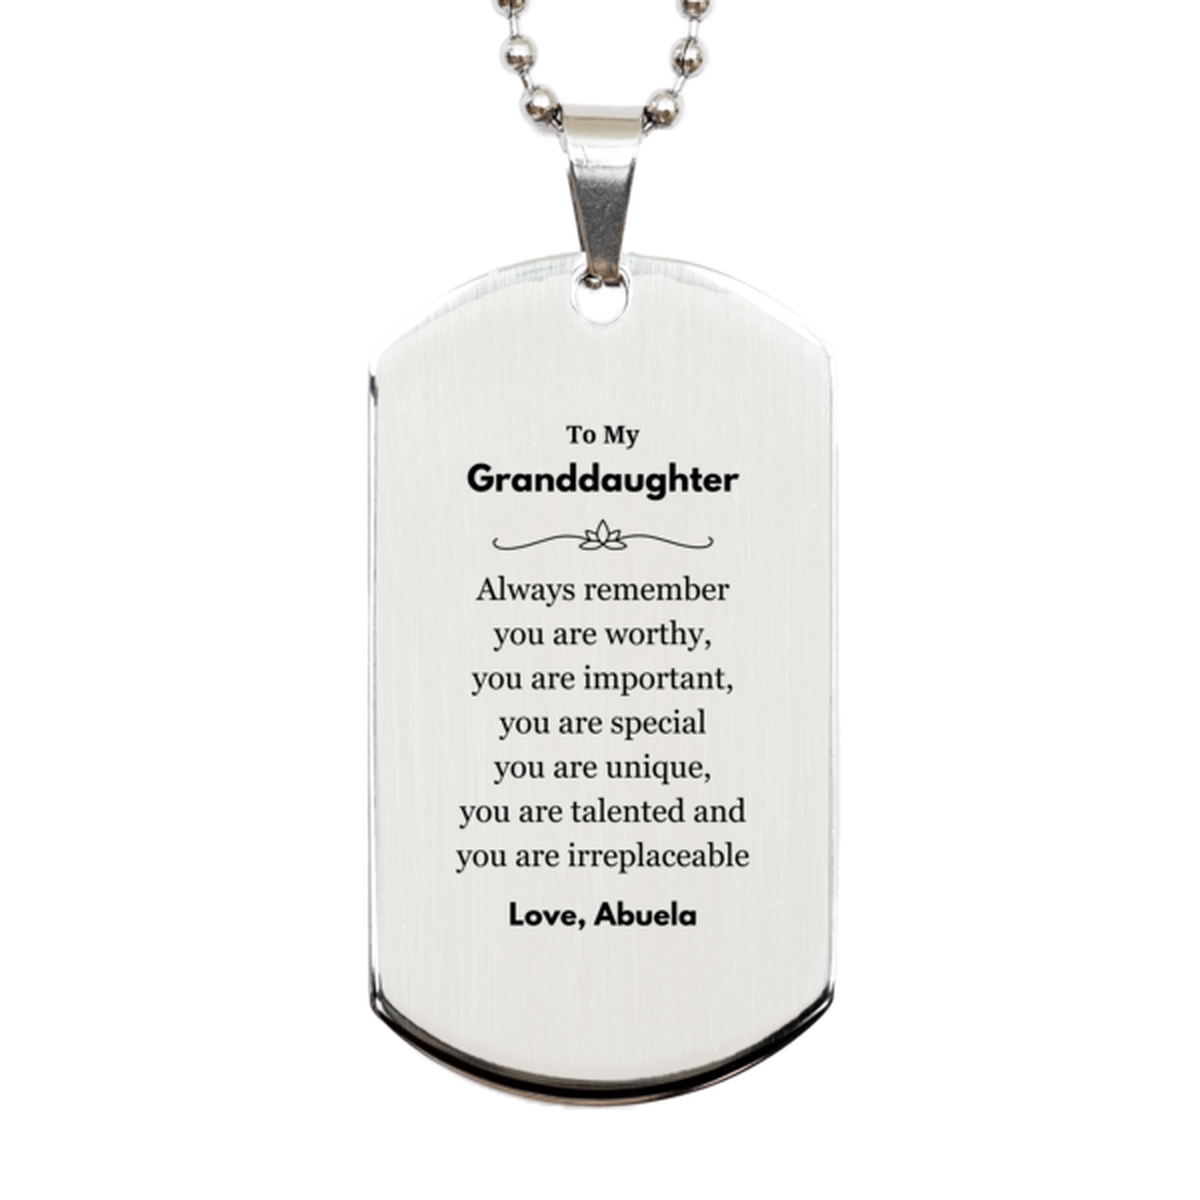 Granddaughter Birthday Gifts from Abuela, Inspirational Silver Dog Tag for Granddaughter Christmas Graduation Gifts for Granddaughter Always remember you are worthy, you are important. Love, Abuela